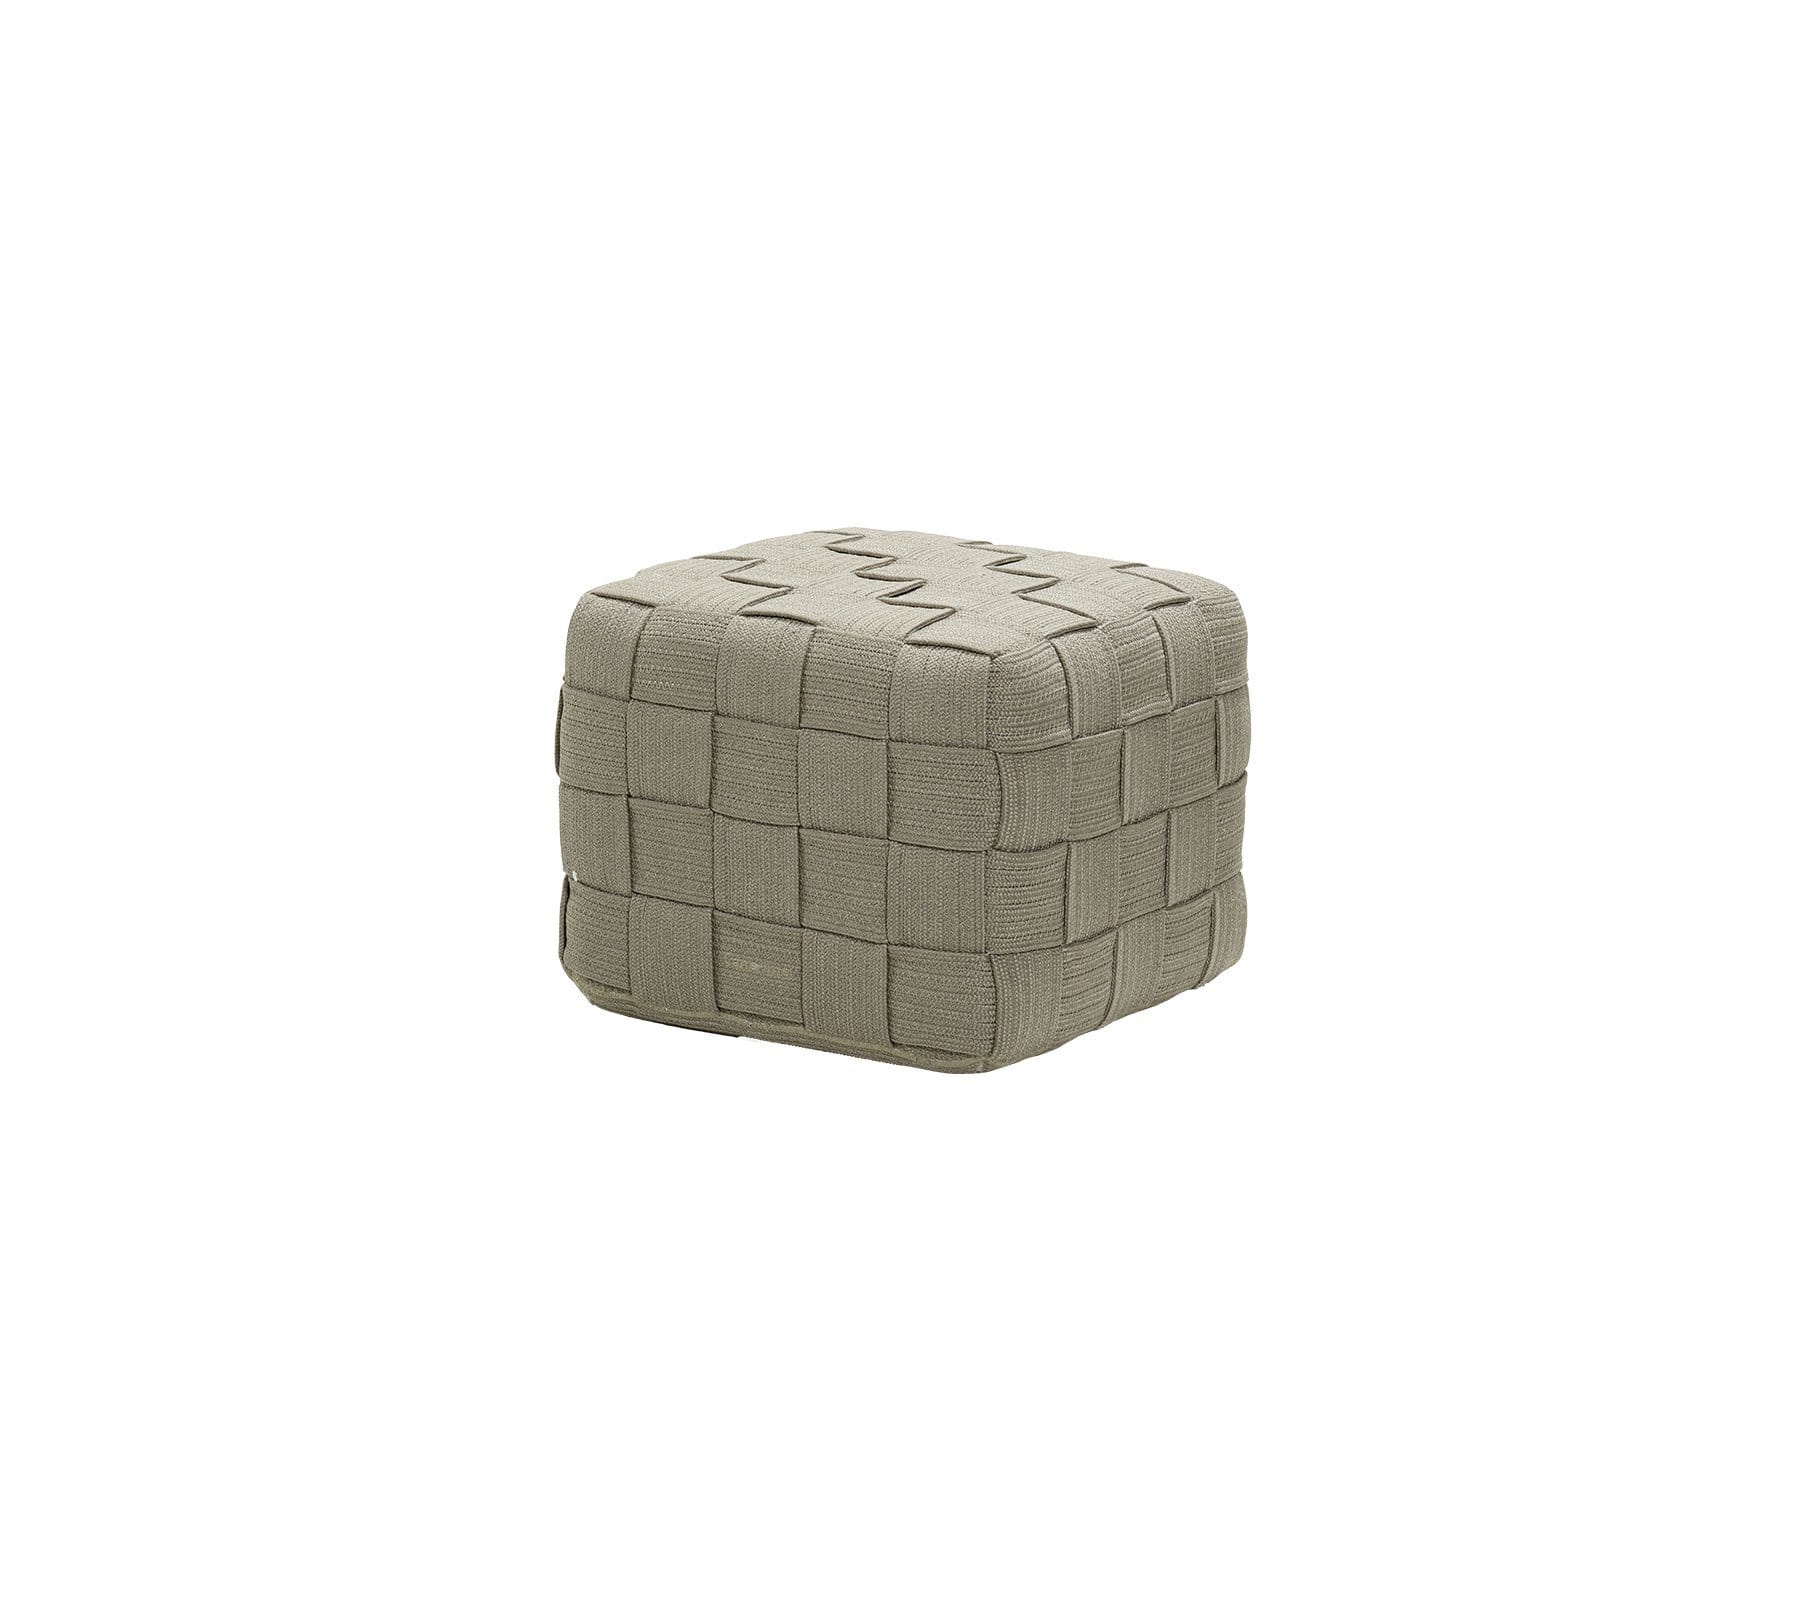 Cane-Line Denmark Outdoor Footstool Taupe Cane-Line Cube footstool 8340